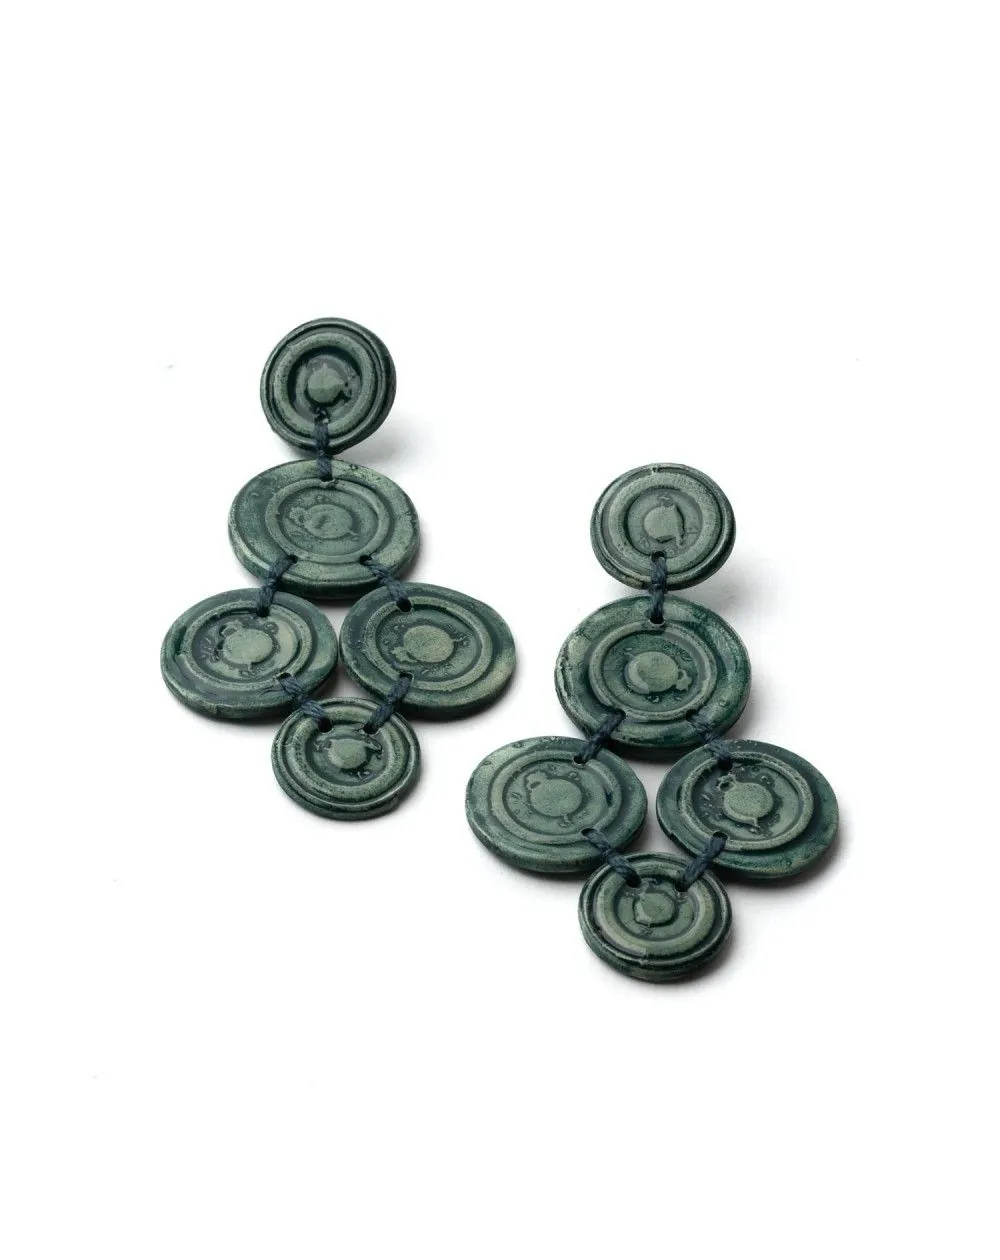 Ceramic earrings Concentric (S050)